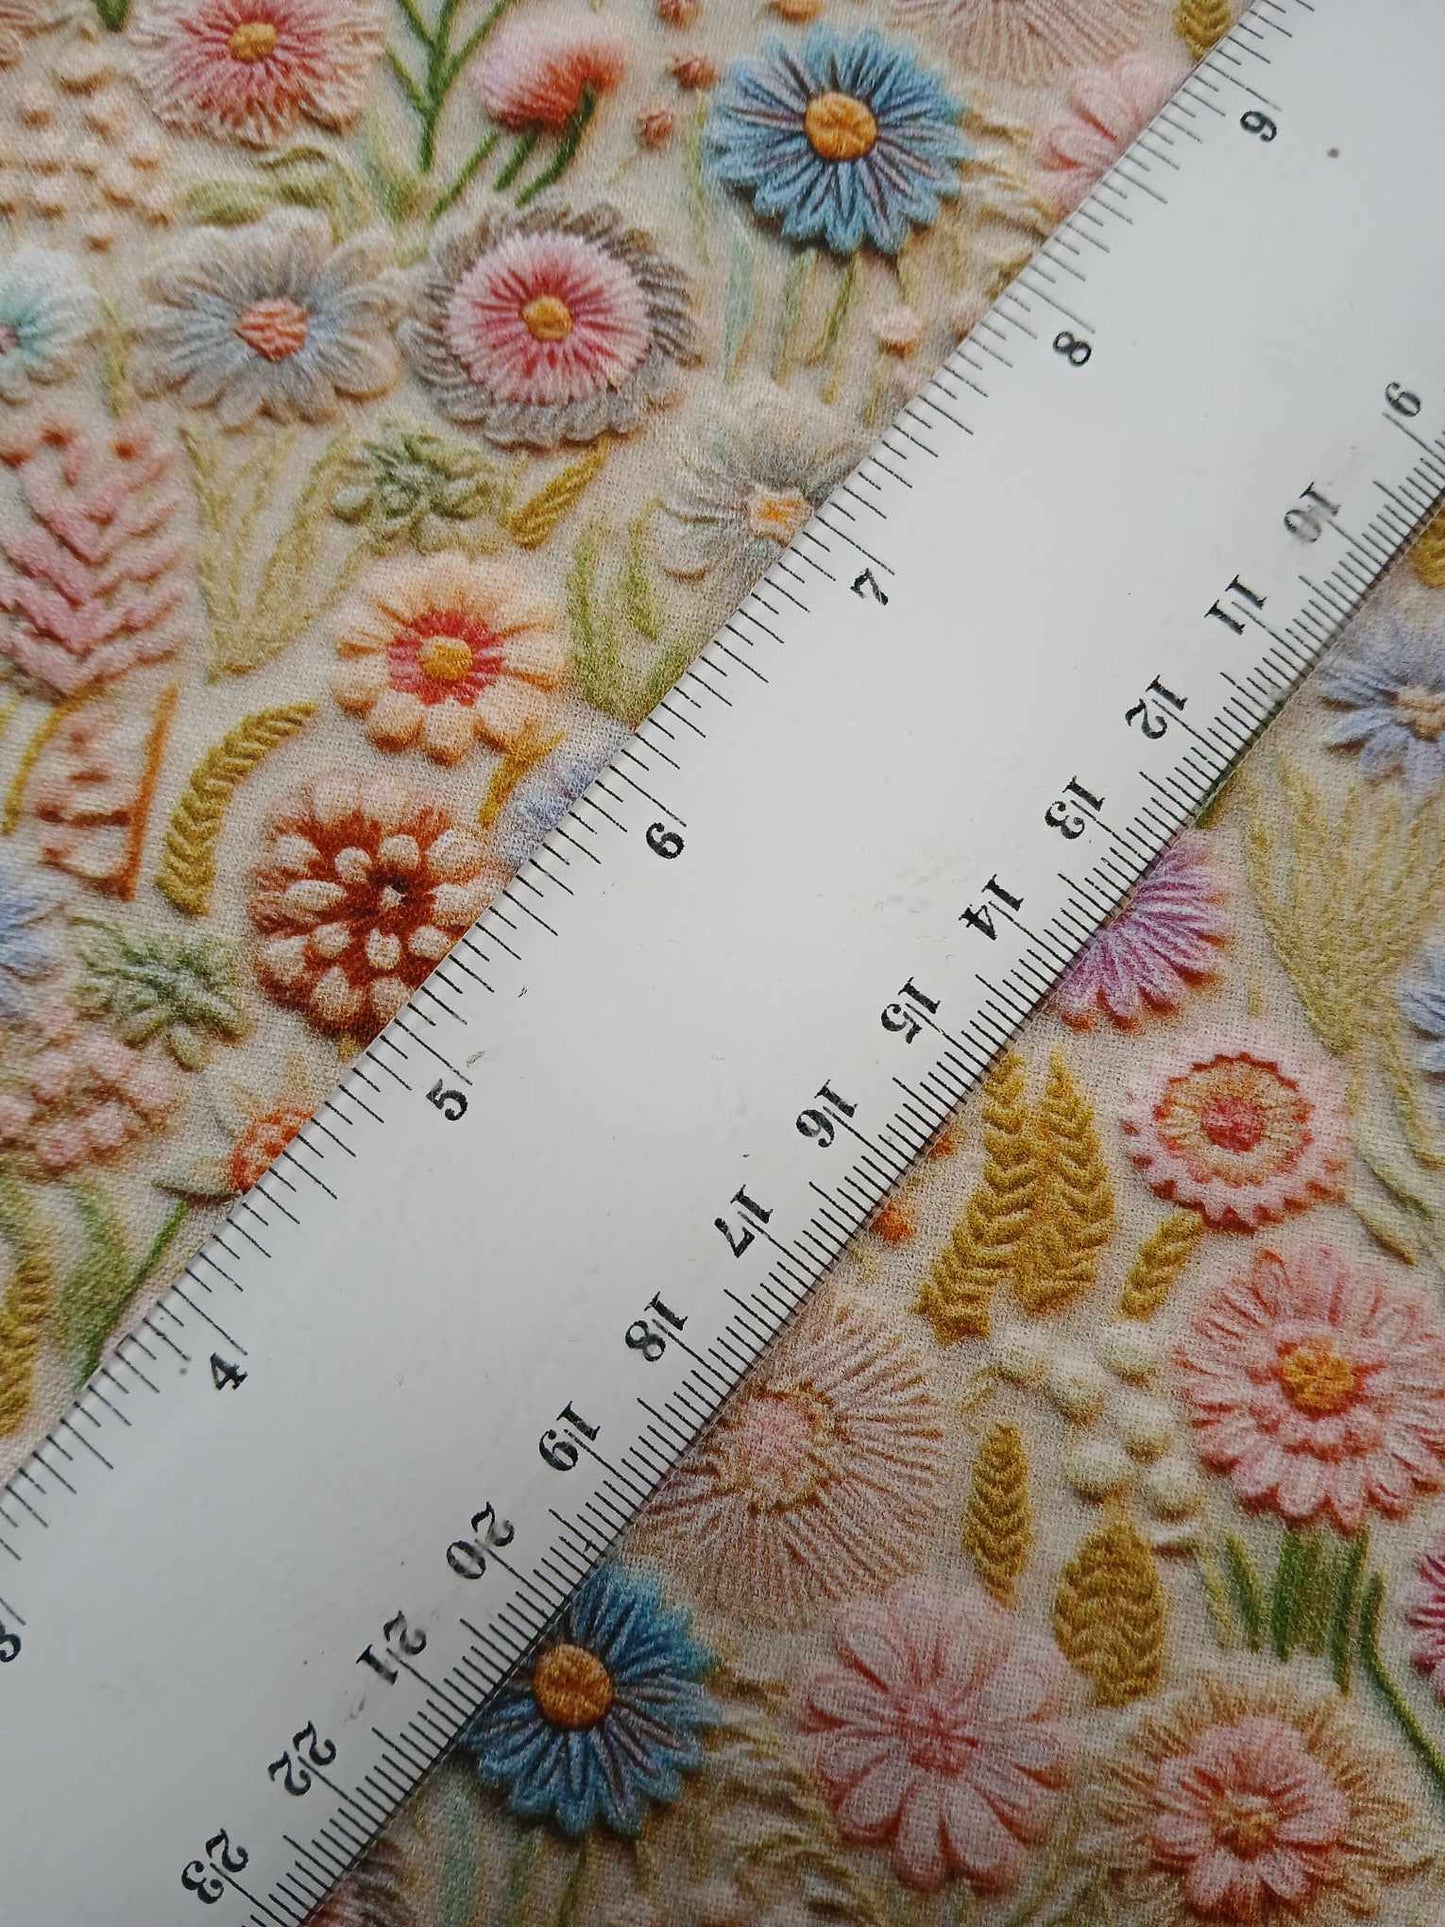 100% Cotton - Digital Print - Cream/Blue/Pink/Peach - 44" Wide - Sold By the Metre